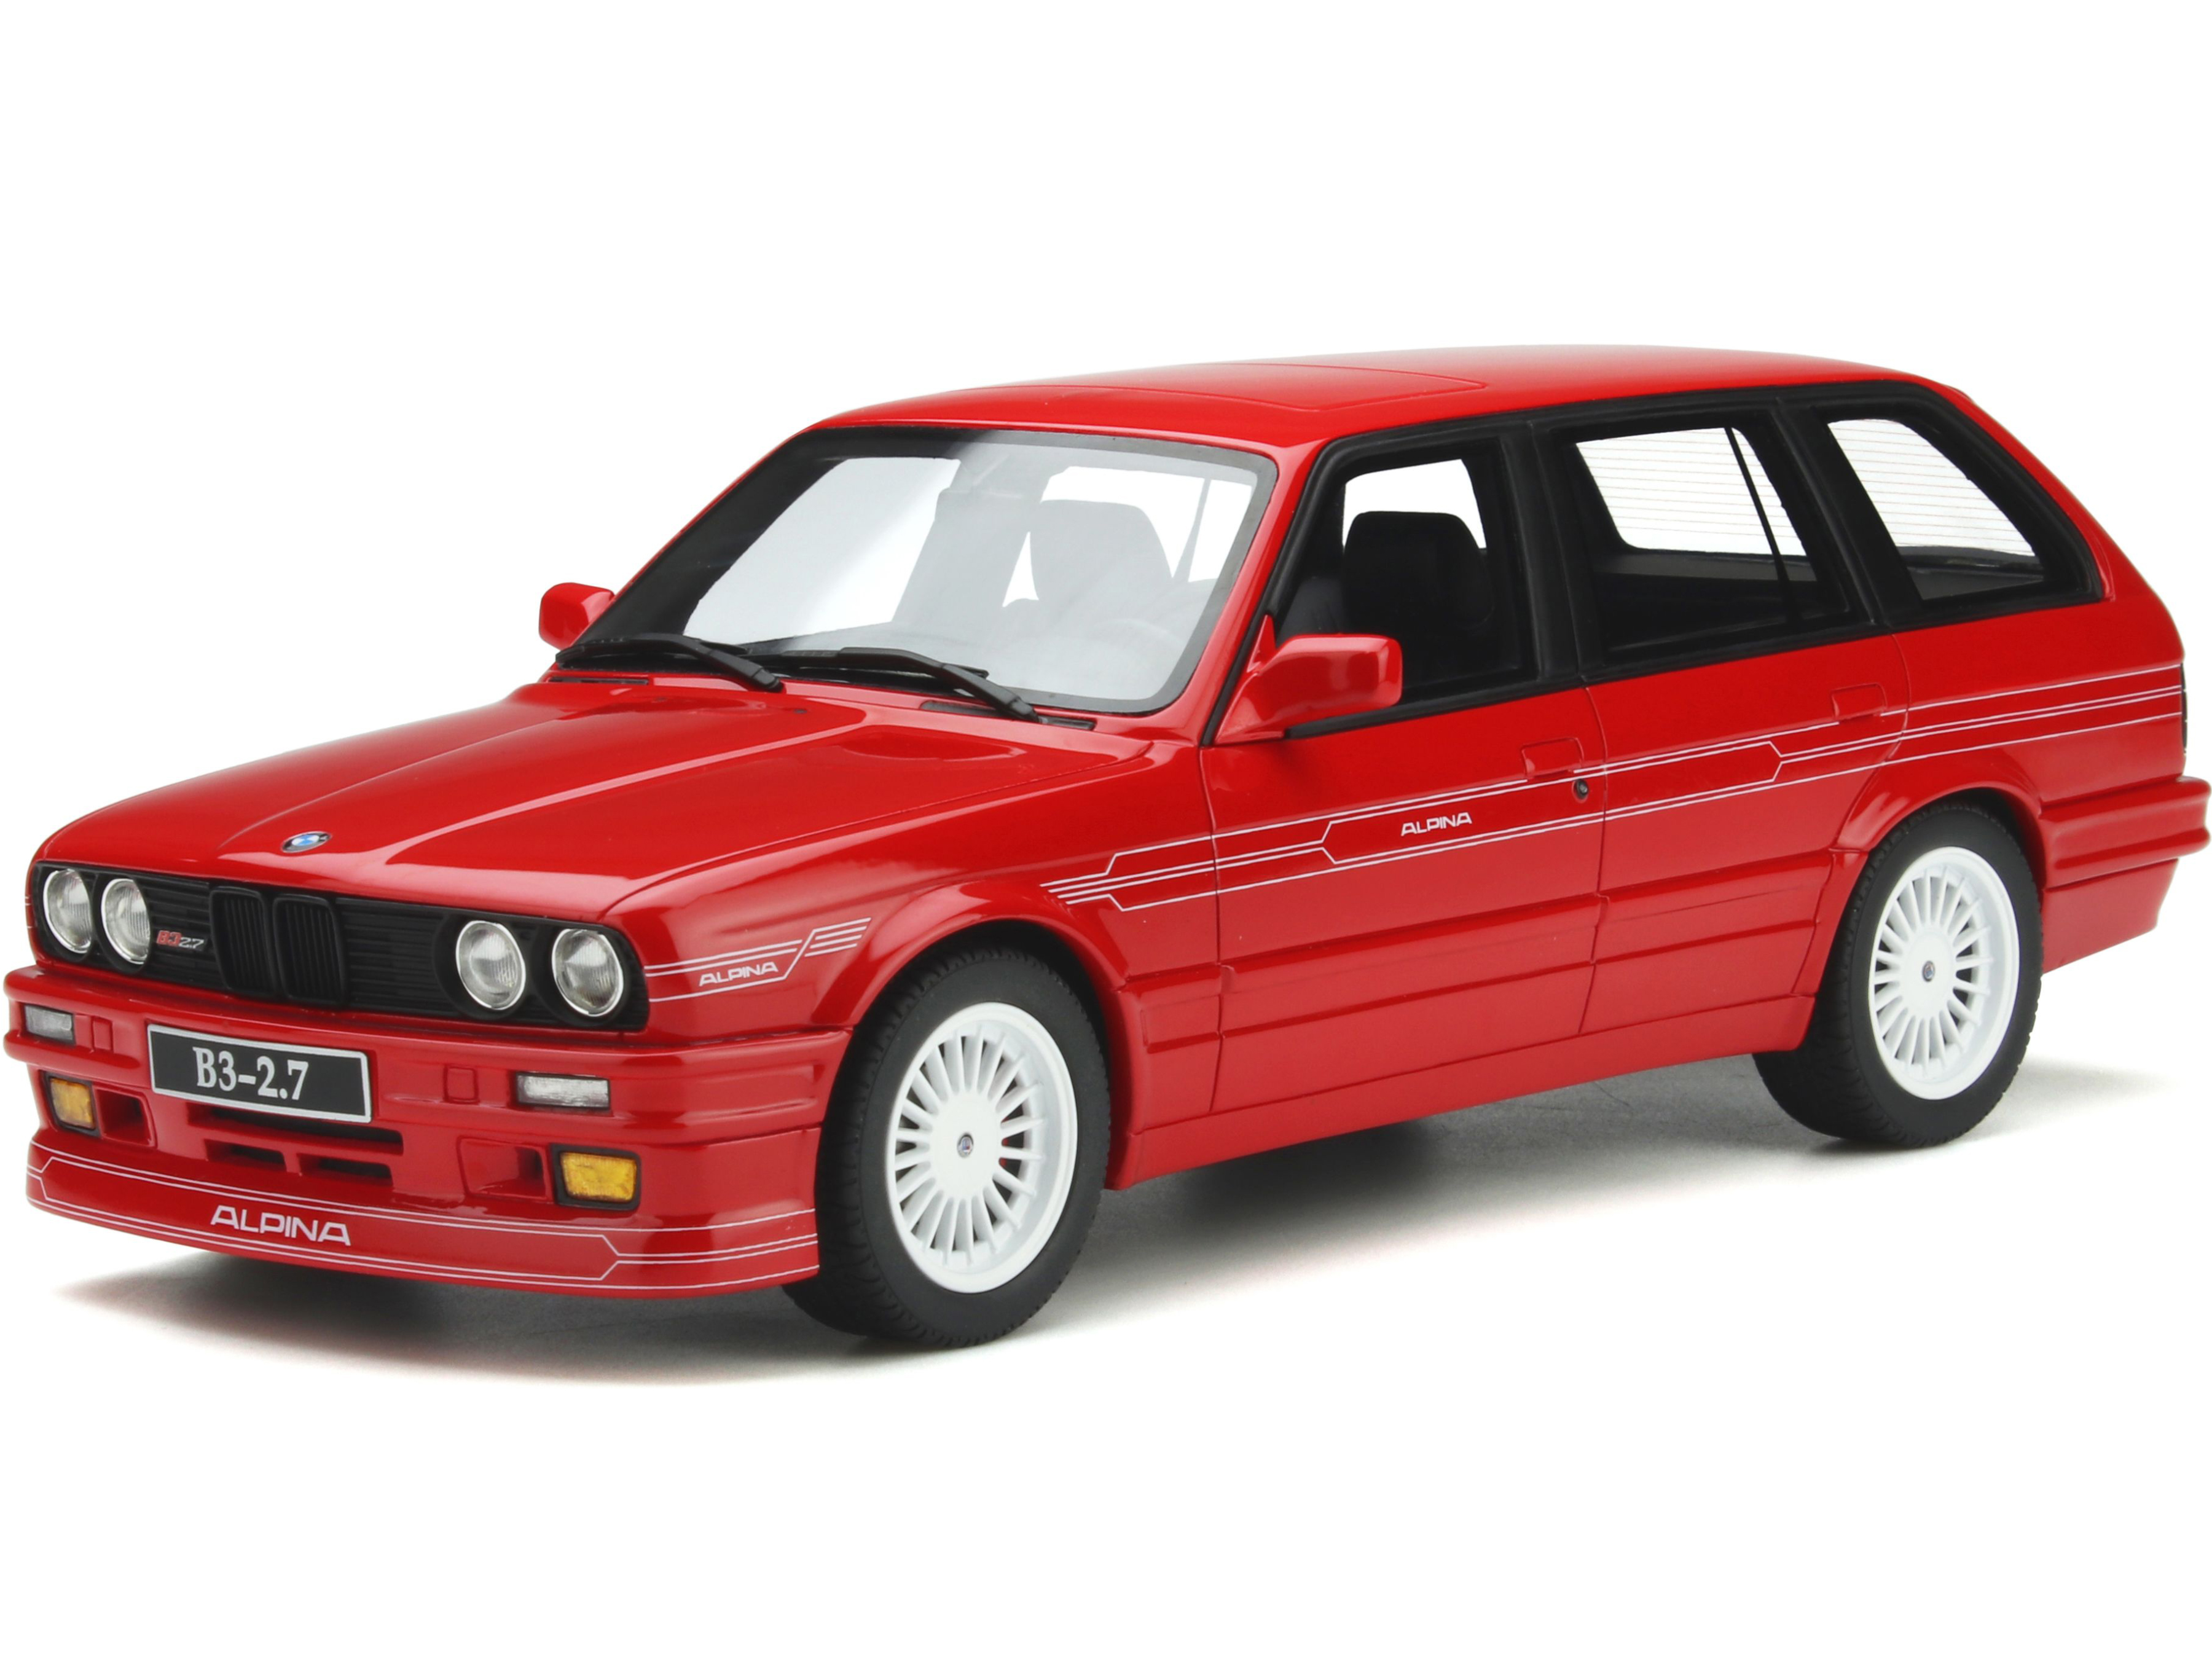 BMW Alpina B3 (E30) Touring 2.7 Brilliant Red Limited Edition to 3000 pieces Worldwide 1/18 Model Car by Otto Mobile